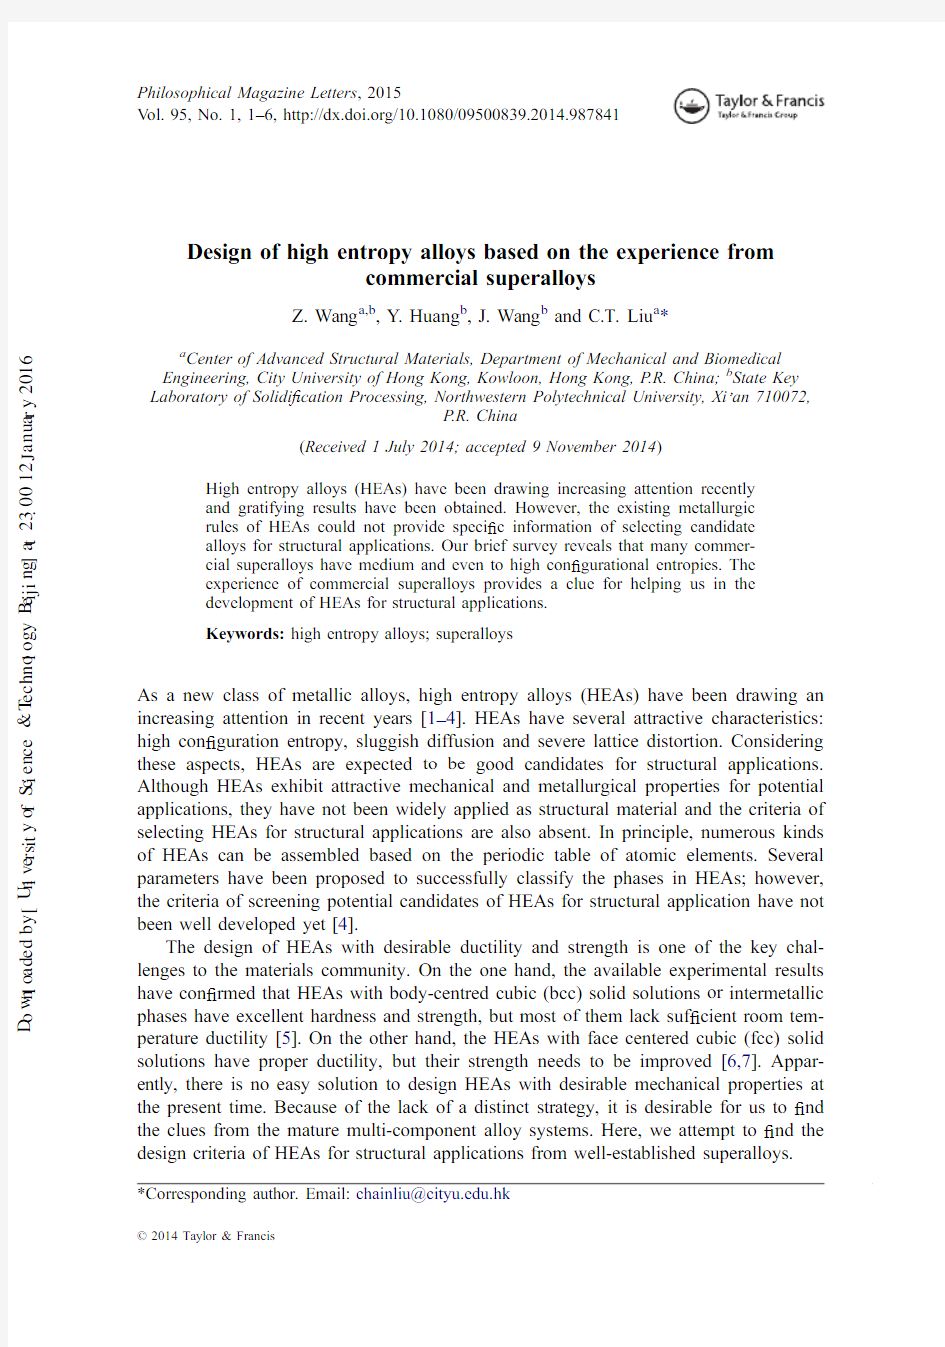 Design of high entropy alloys based on the experience from